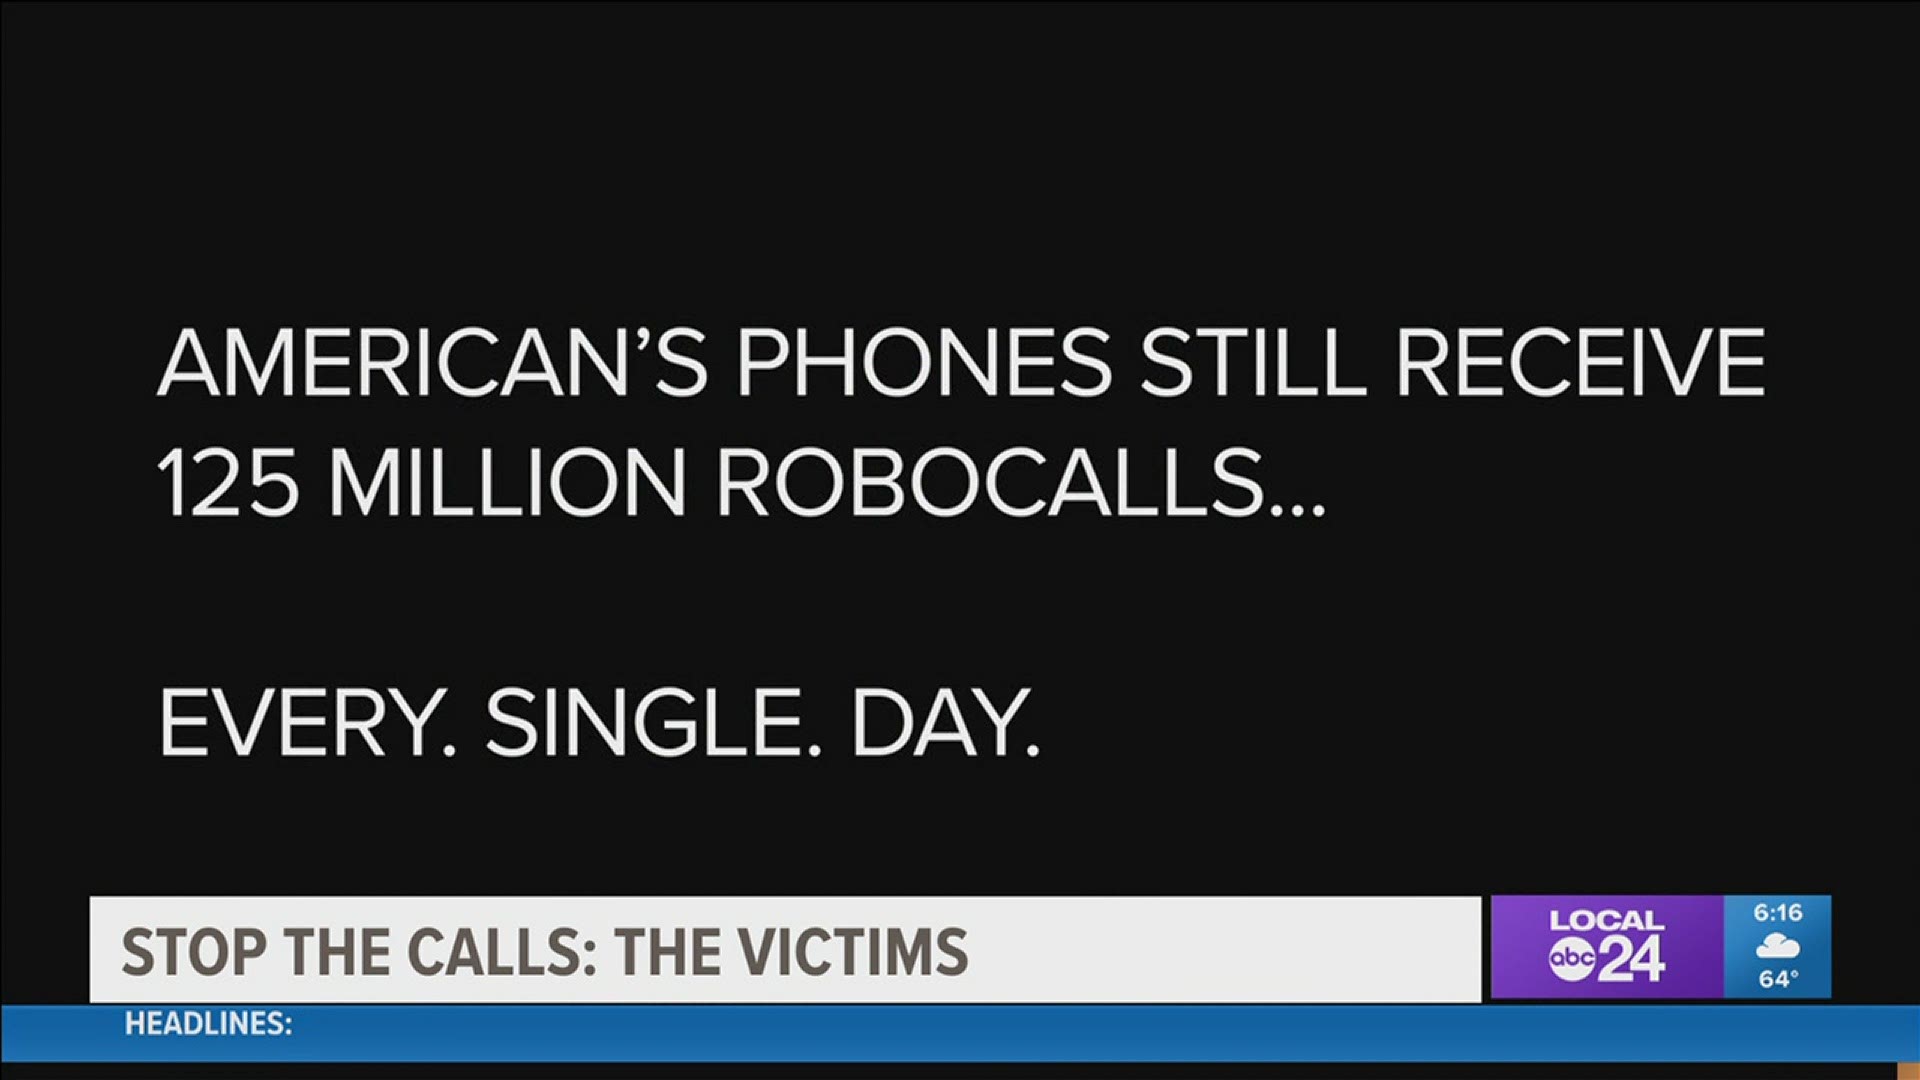 One Memphis woman fought back against robocallers and was awarded $459,000 in damages.